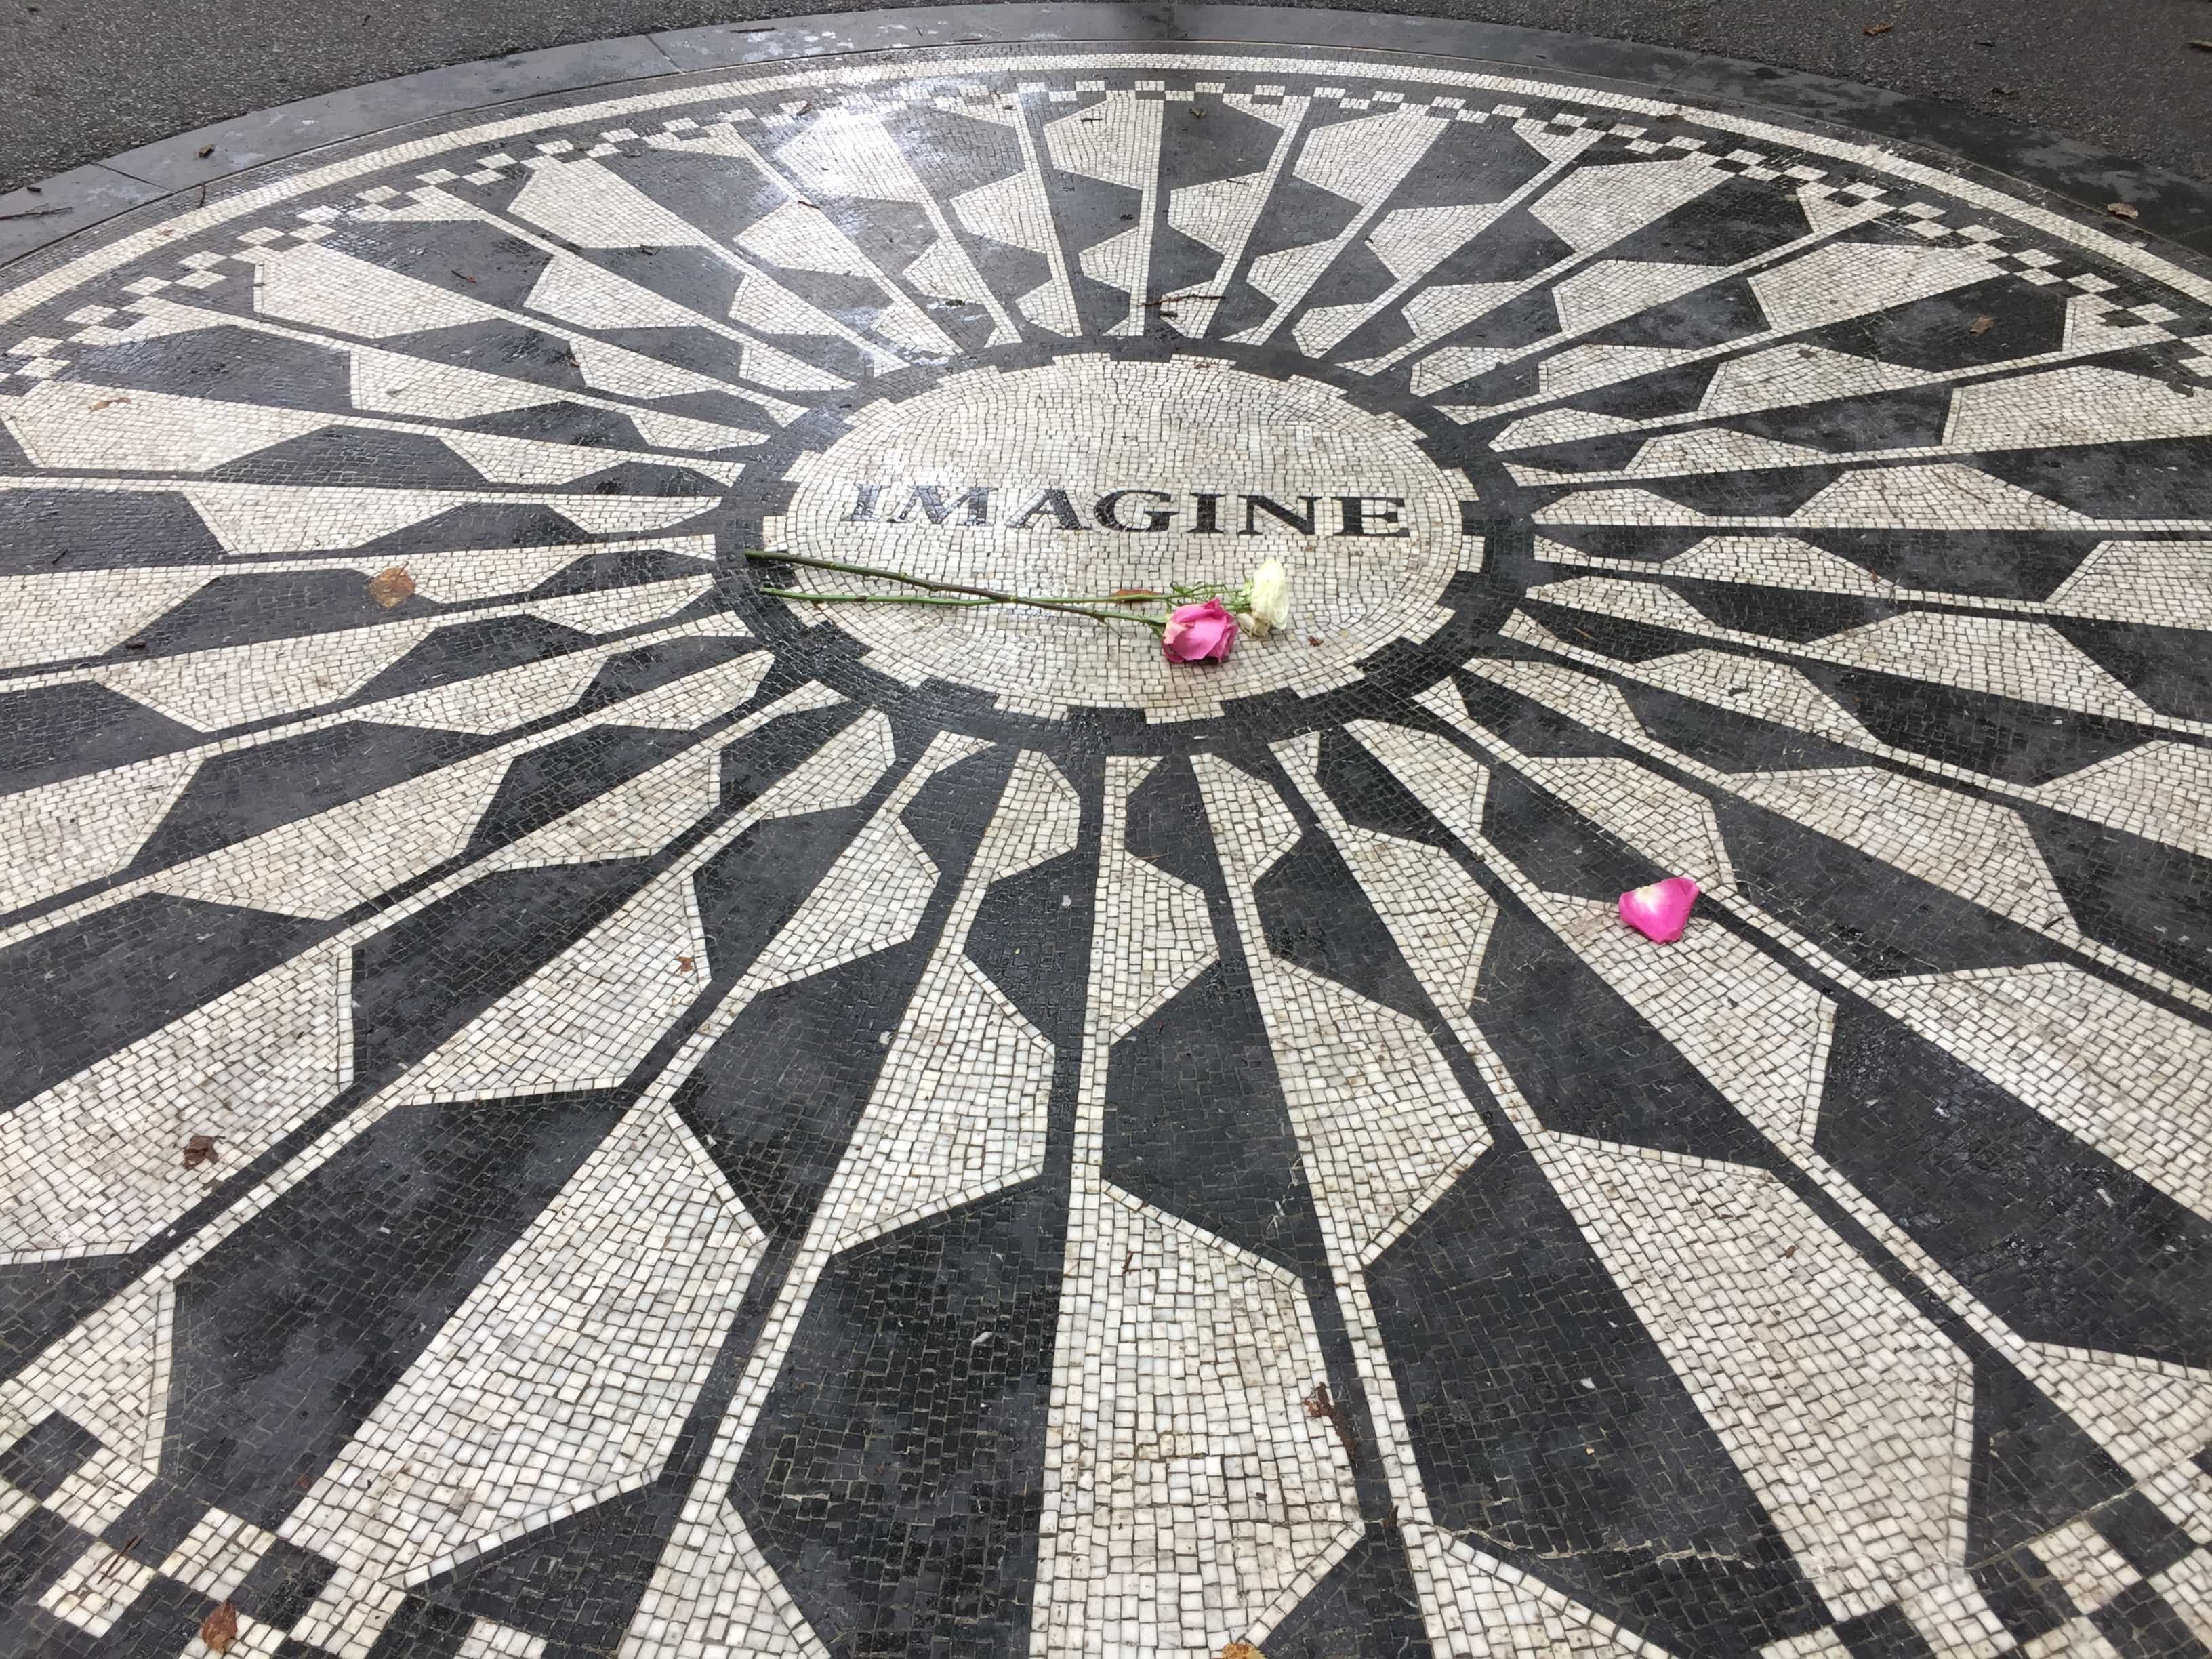 Imagine mosaic in Strawberry Fields, Central Park